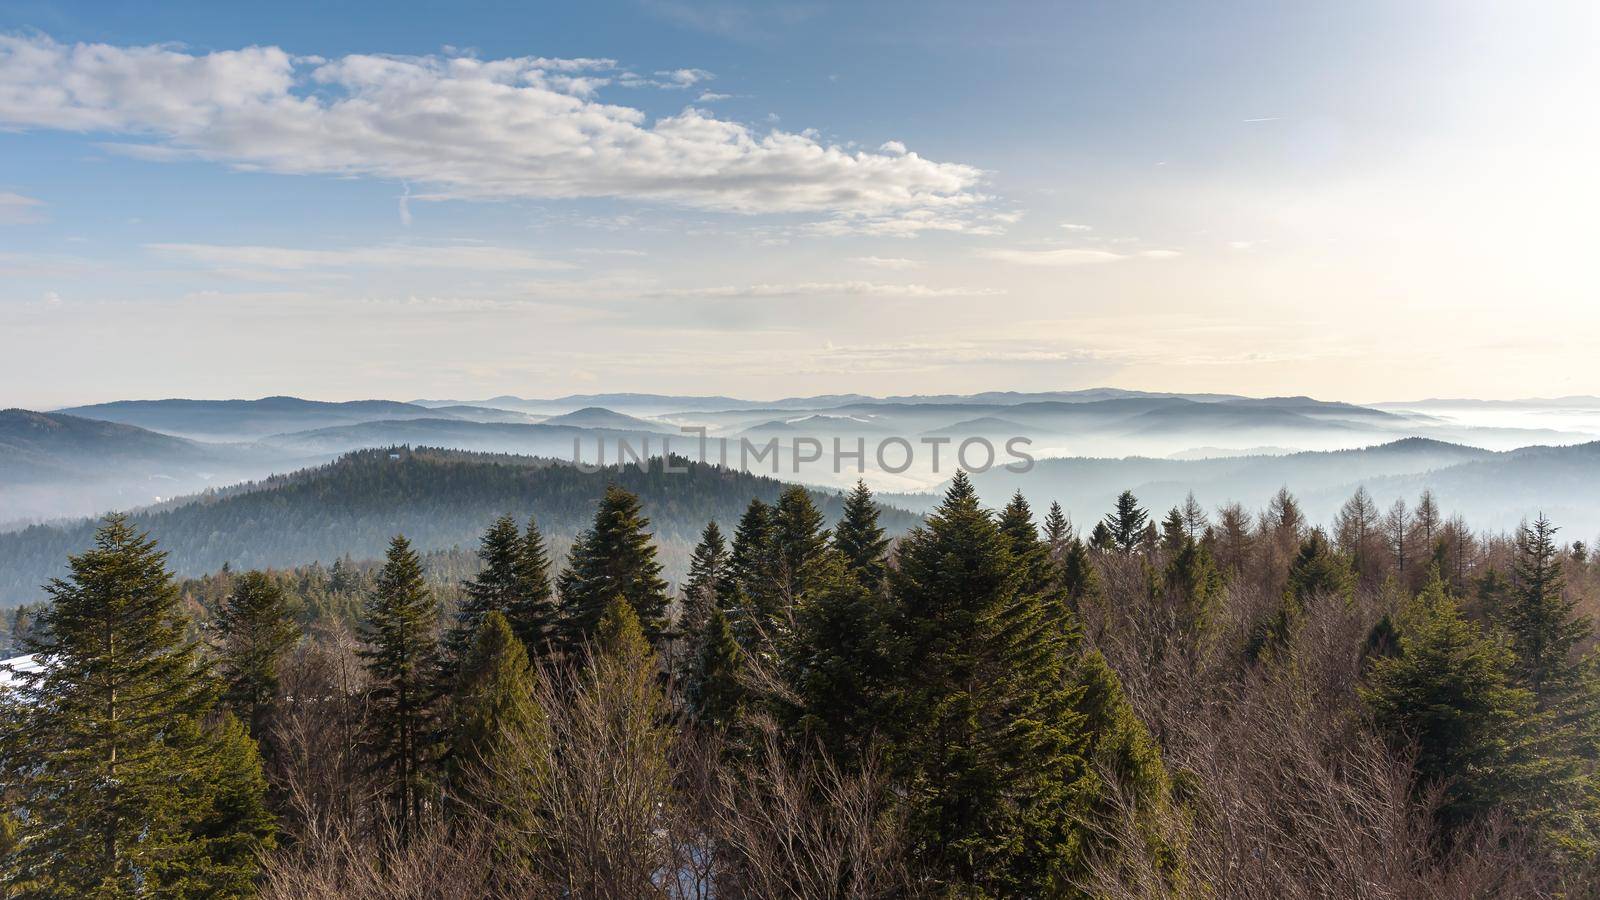 Foggy view of Beskid Sadecki mountain range in Poland on a sunny day